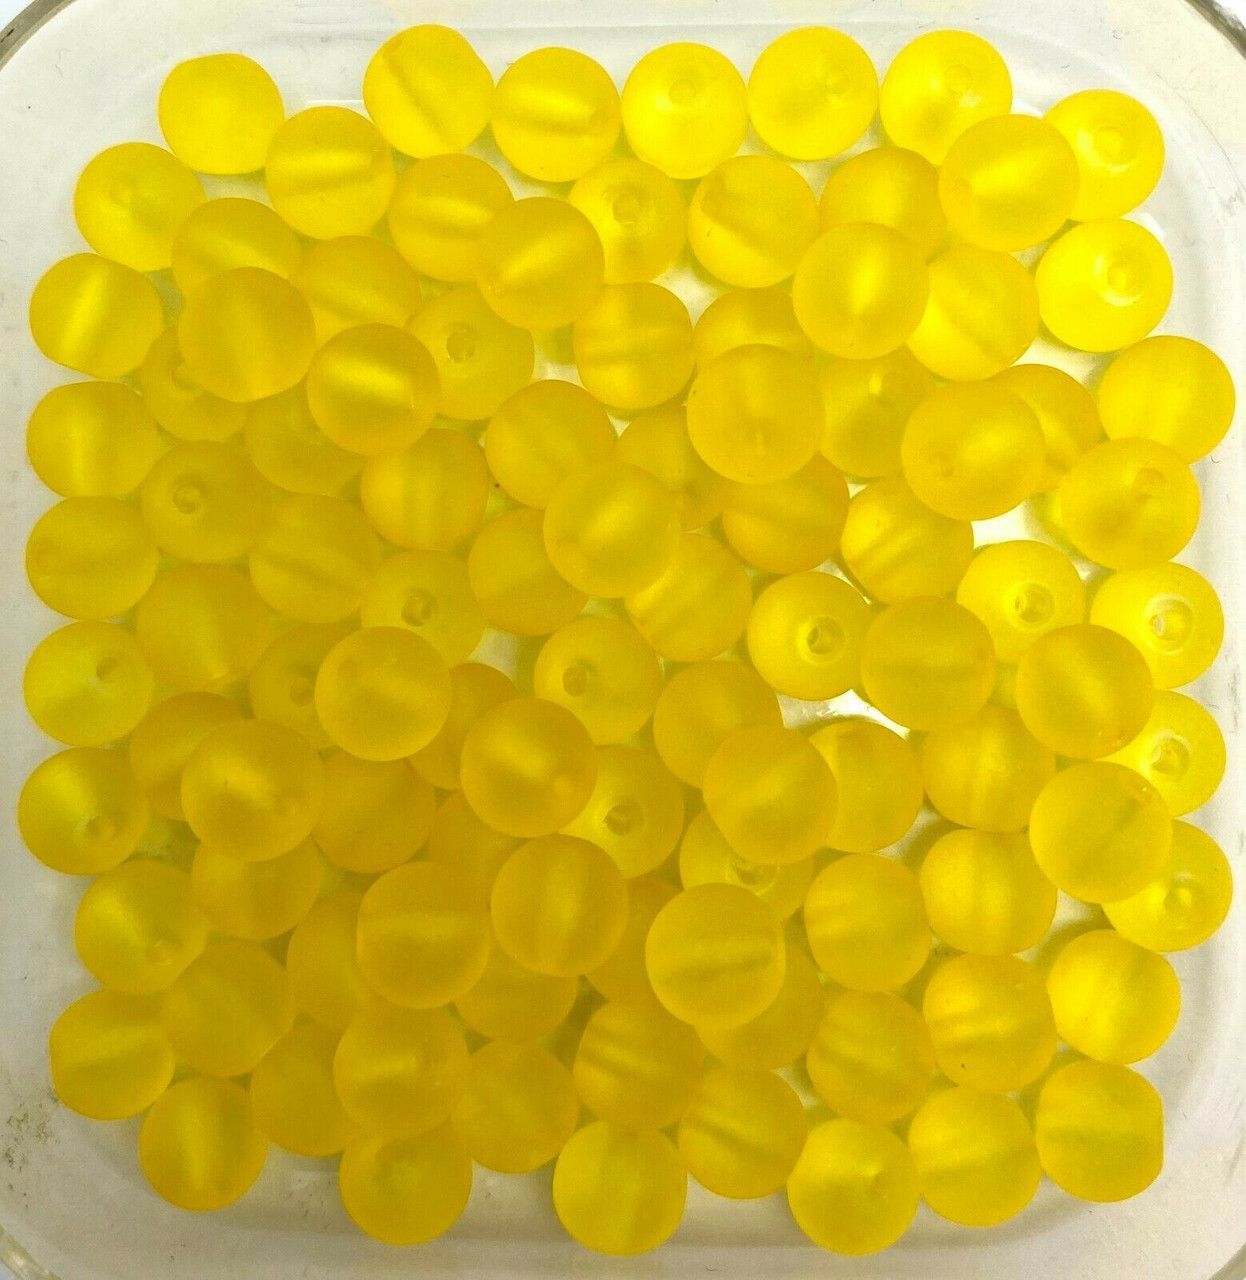 6mm Frosted Glass Beads - Sunshine Yellow, approx 100 beads